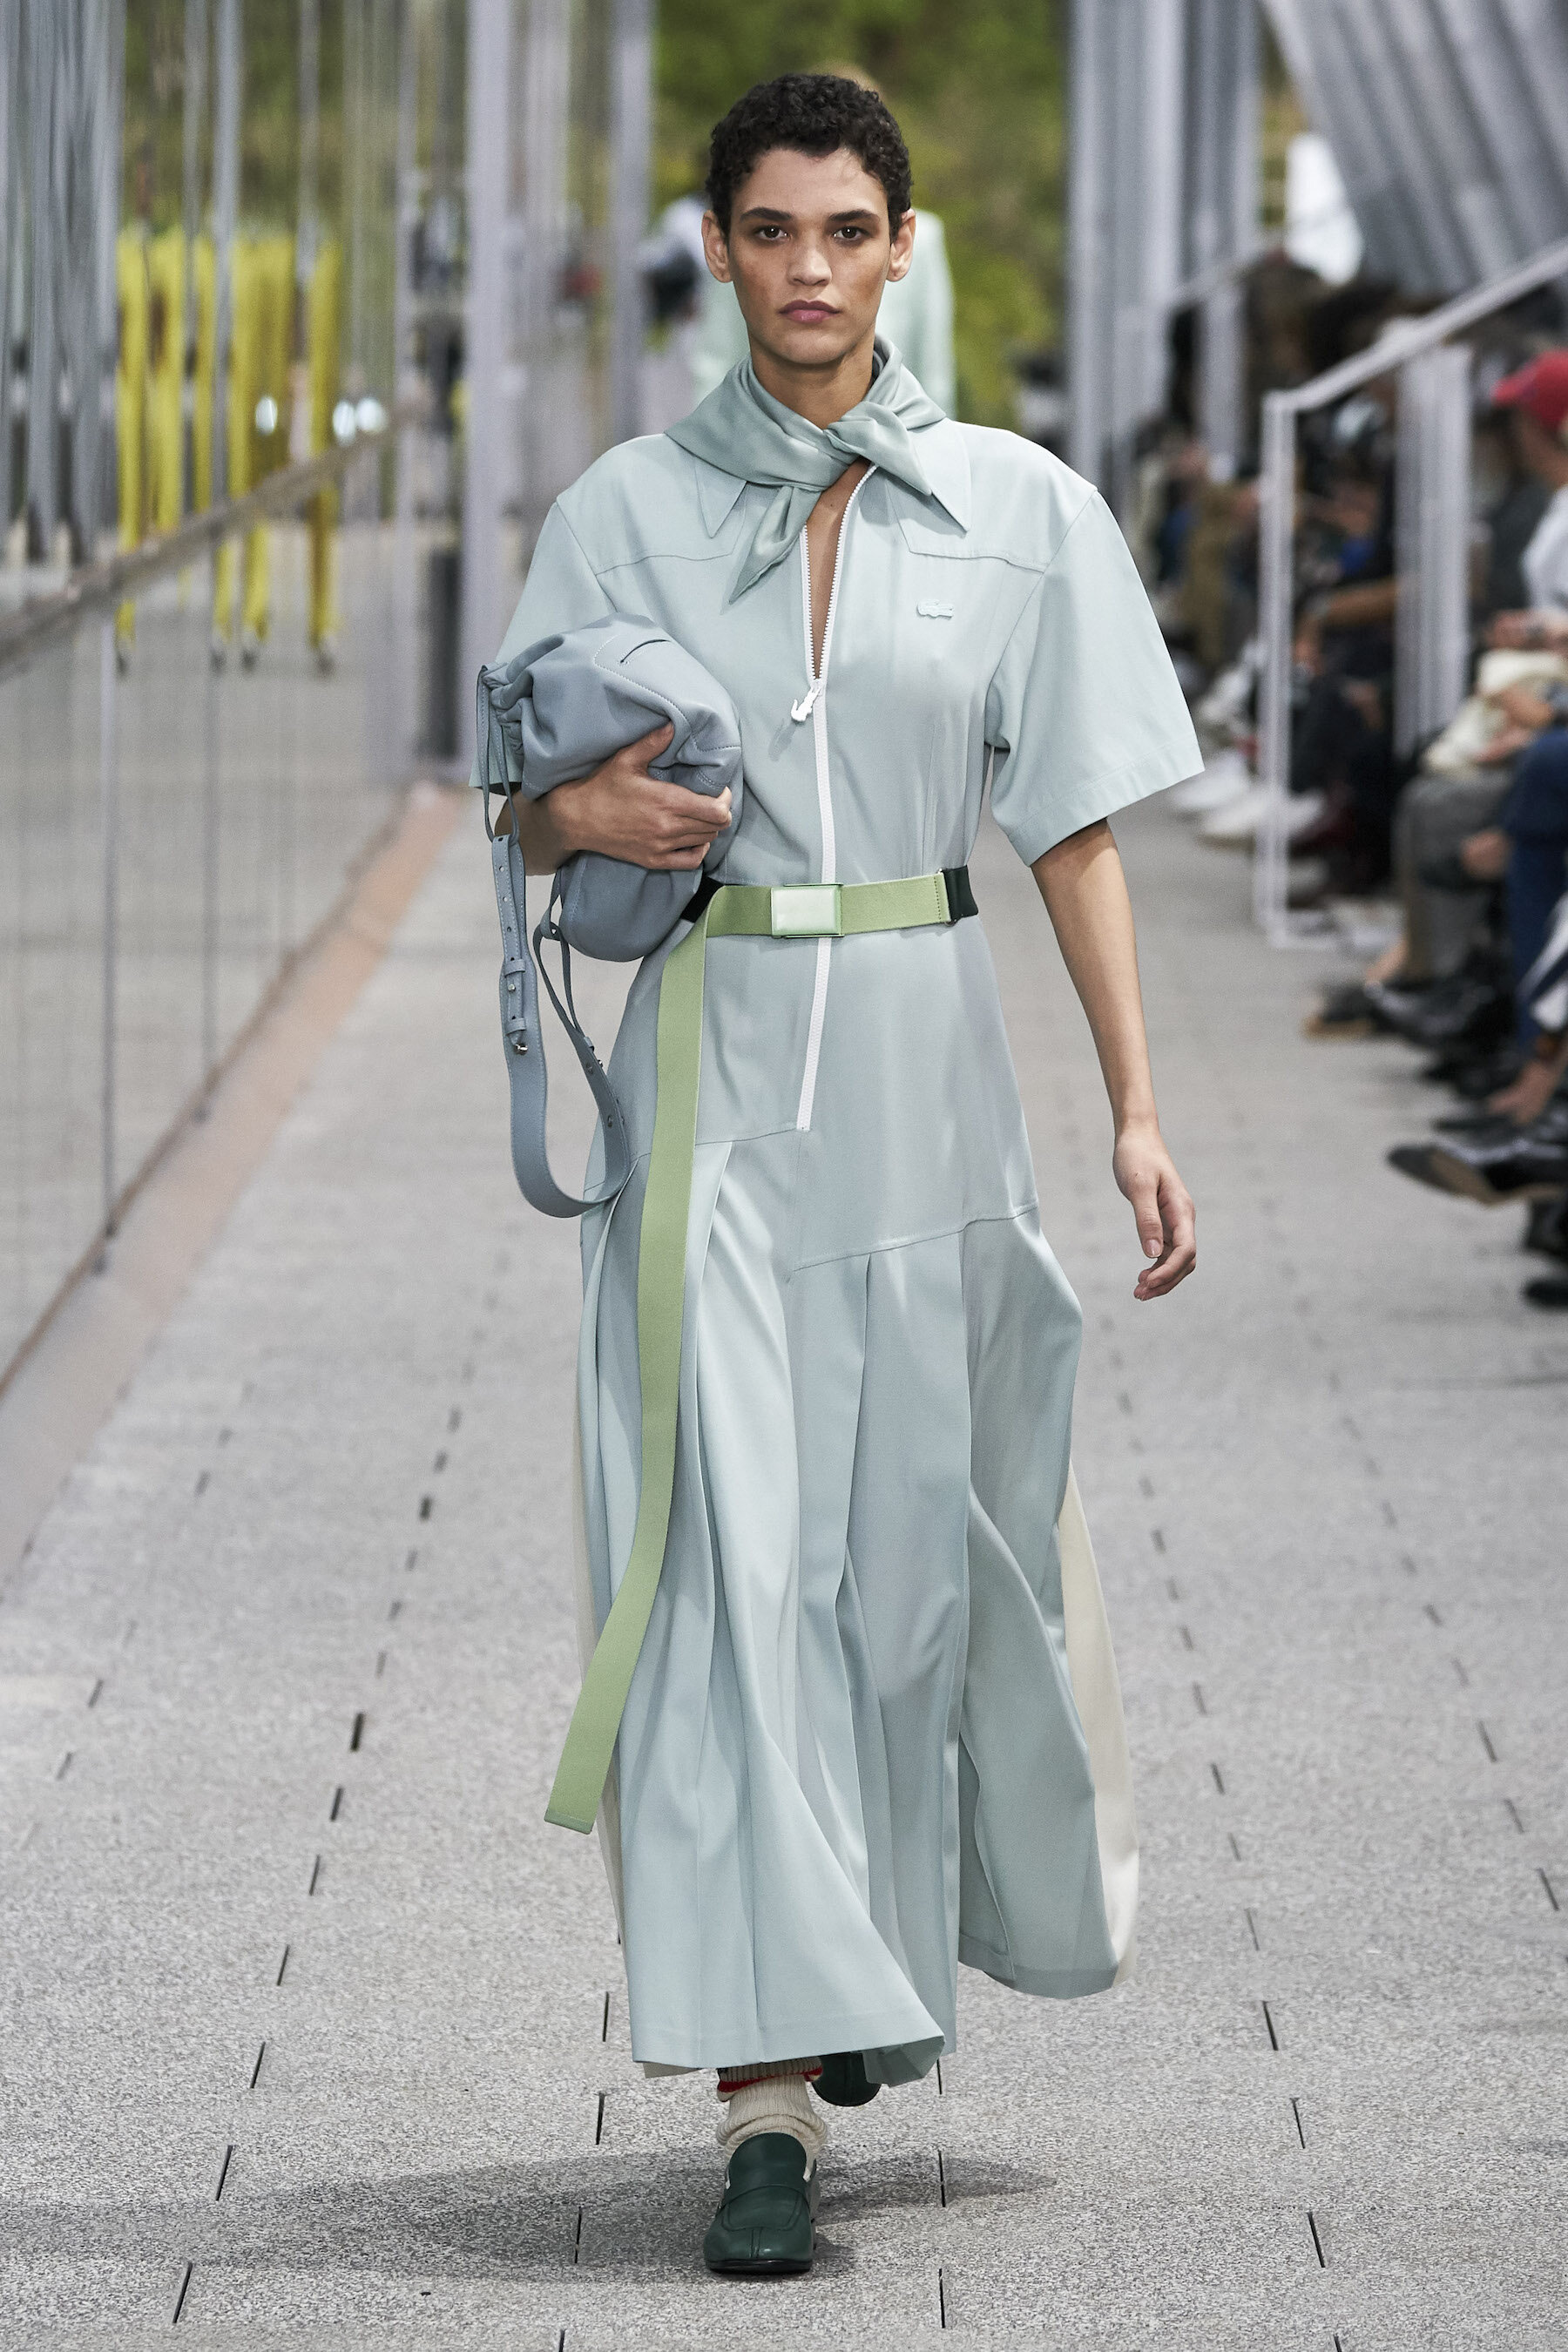 Lacoste SS20_LOOK 30 by Alessandro Lucioni  Imaxtree.com.jpg